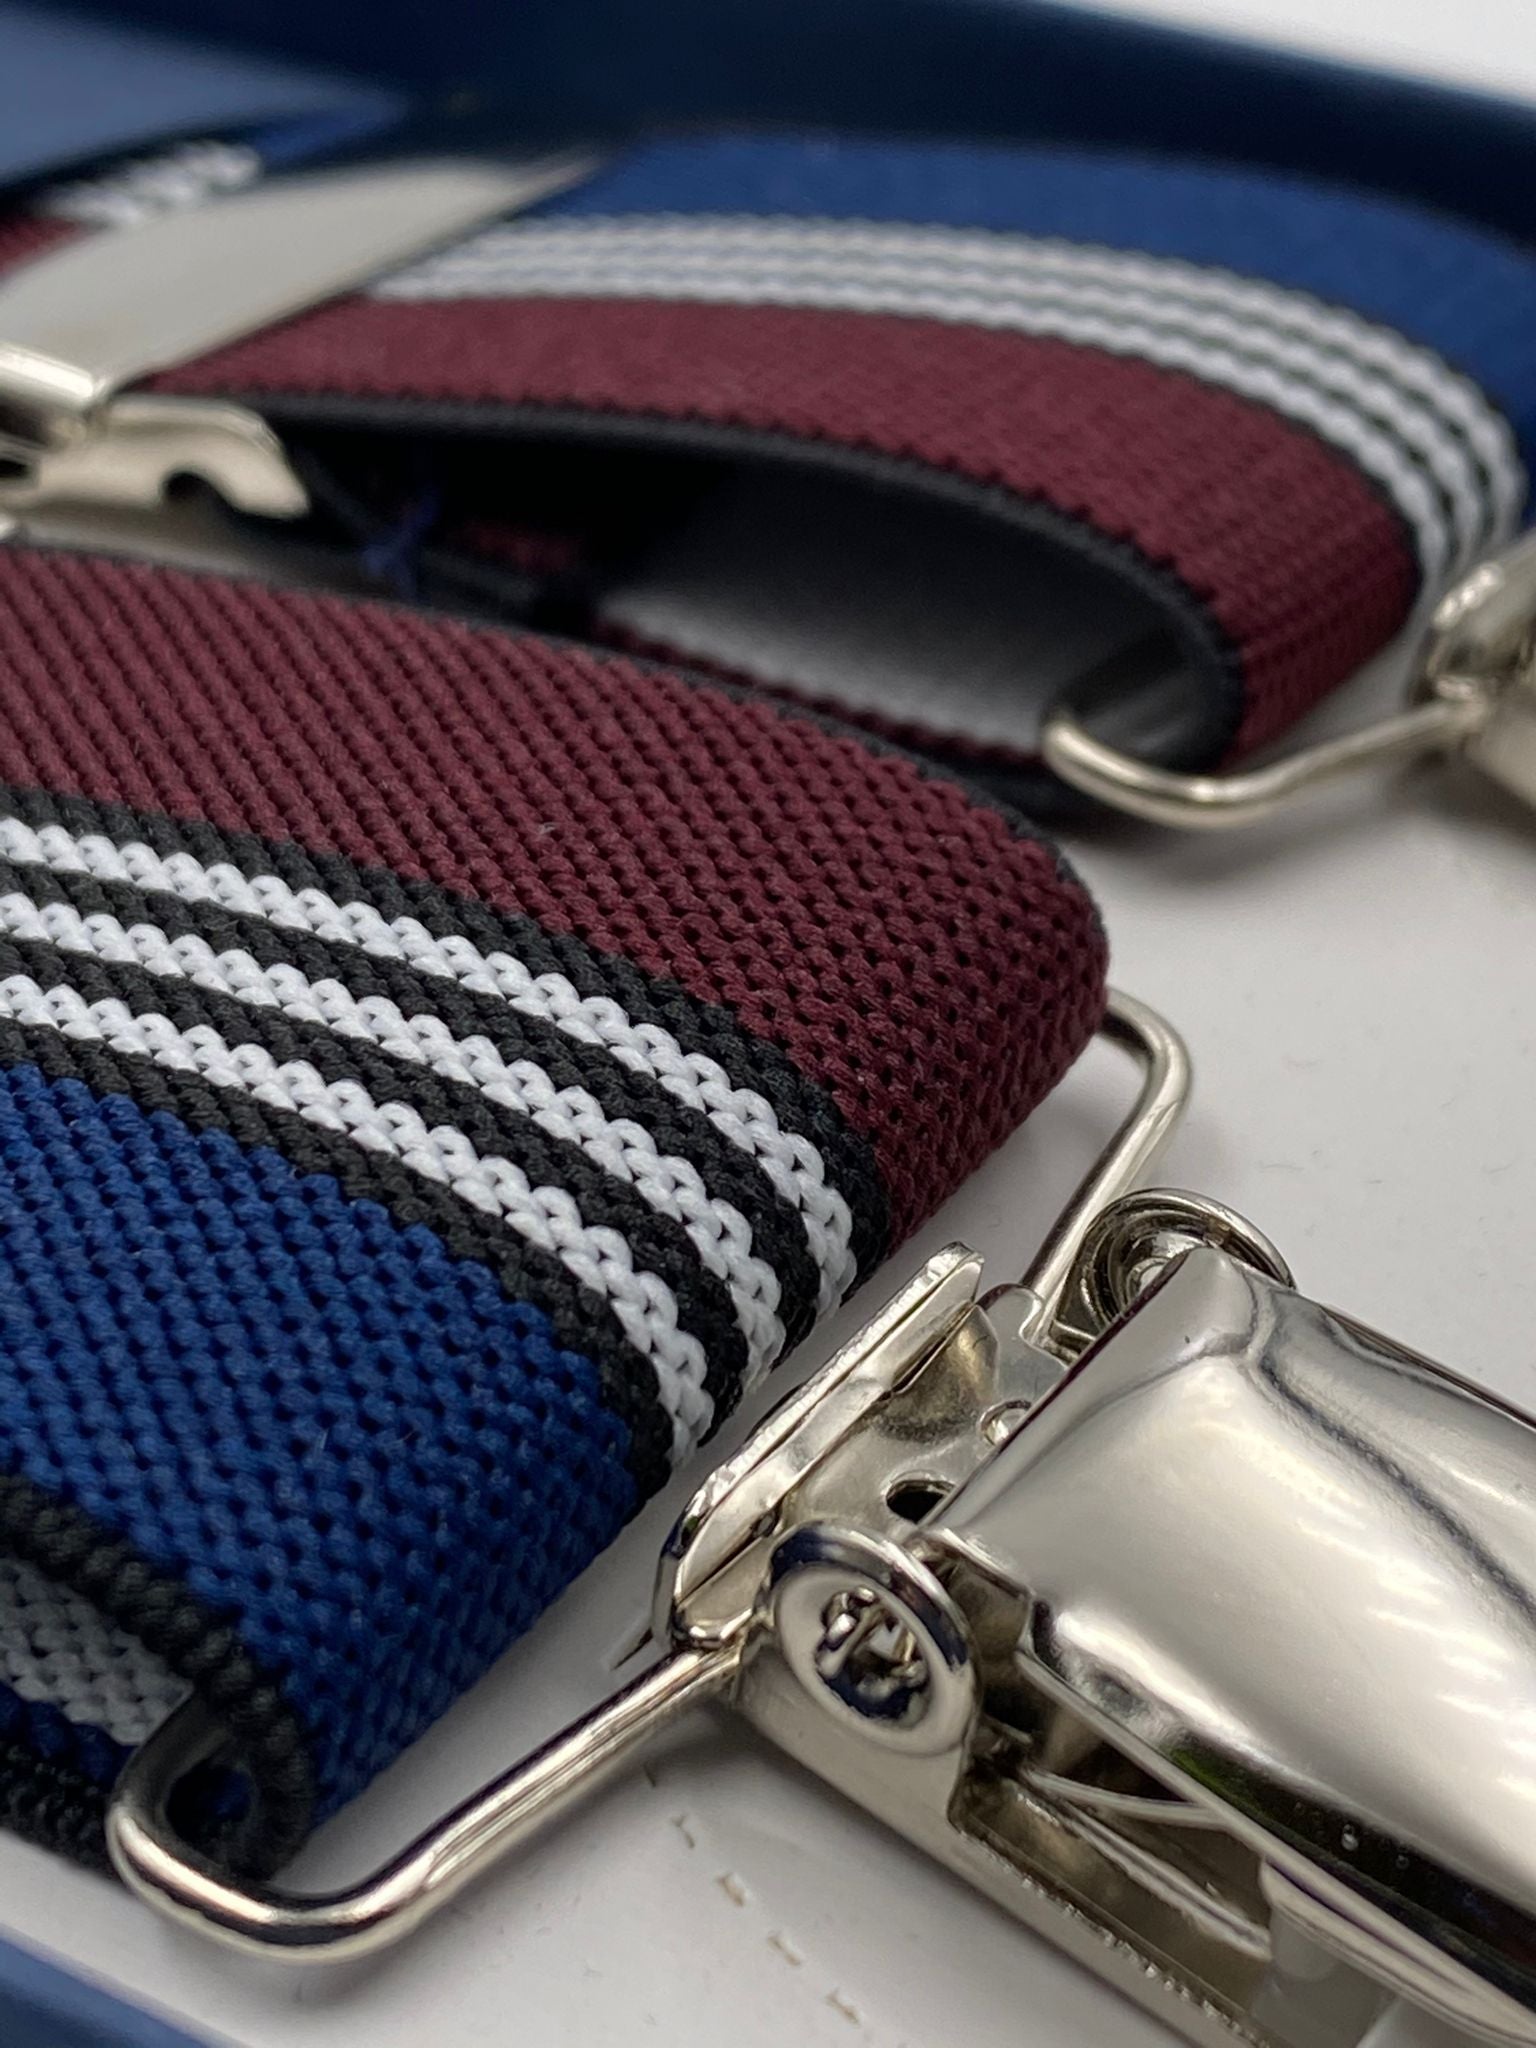 Albert Thurston for Cruciani & Bella Made in England Clip on Adjustable Sizing 35 mm elastic braces Blue, Dark Red and White Stripe X-Shaped Nickel Fittings Size: L #4805